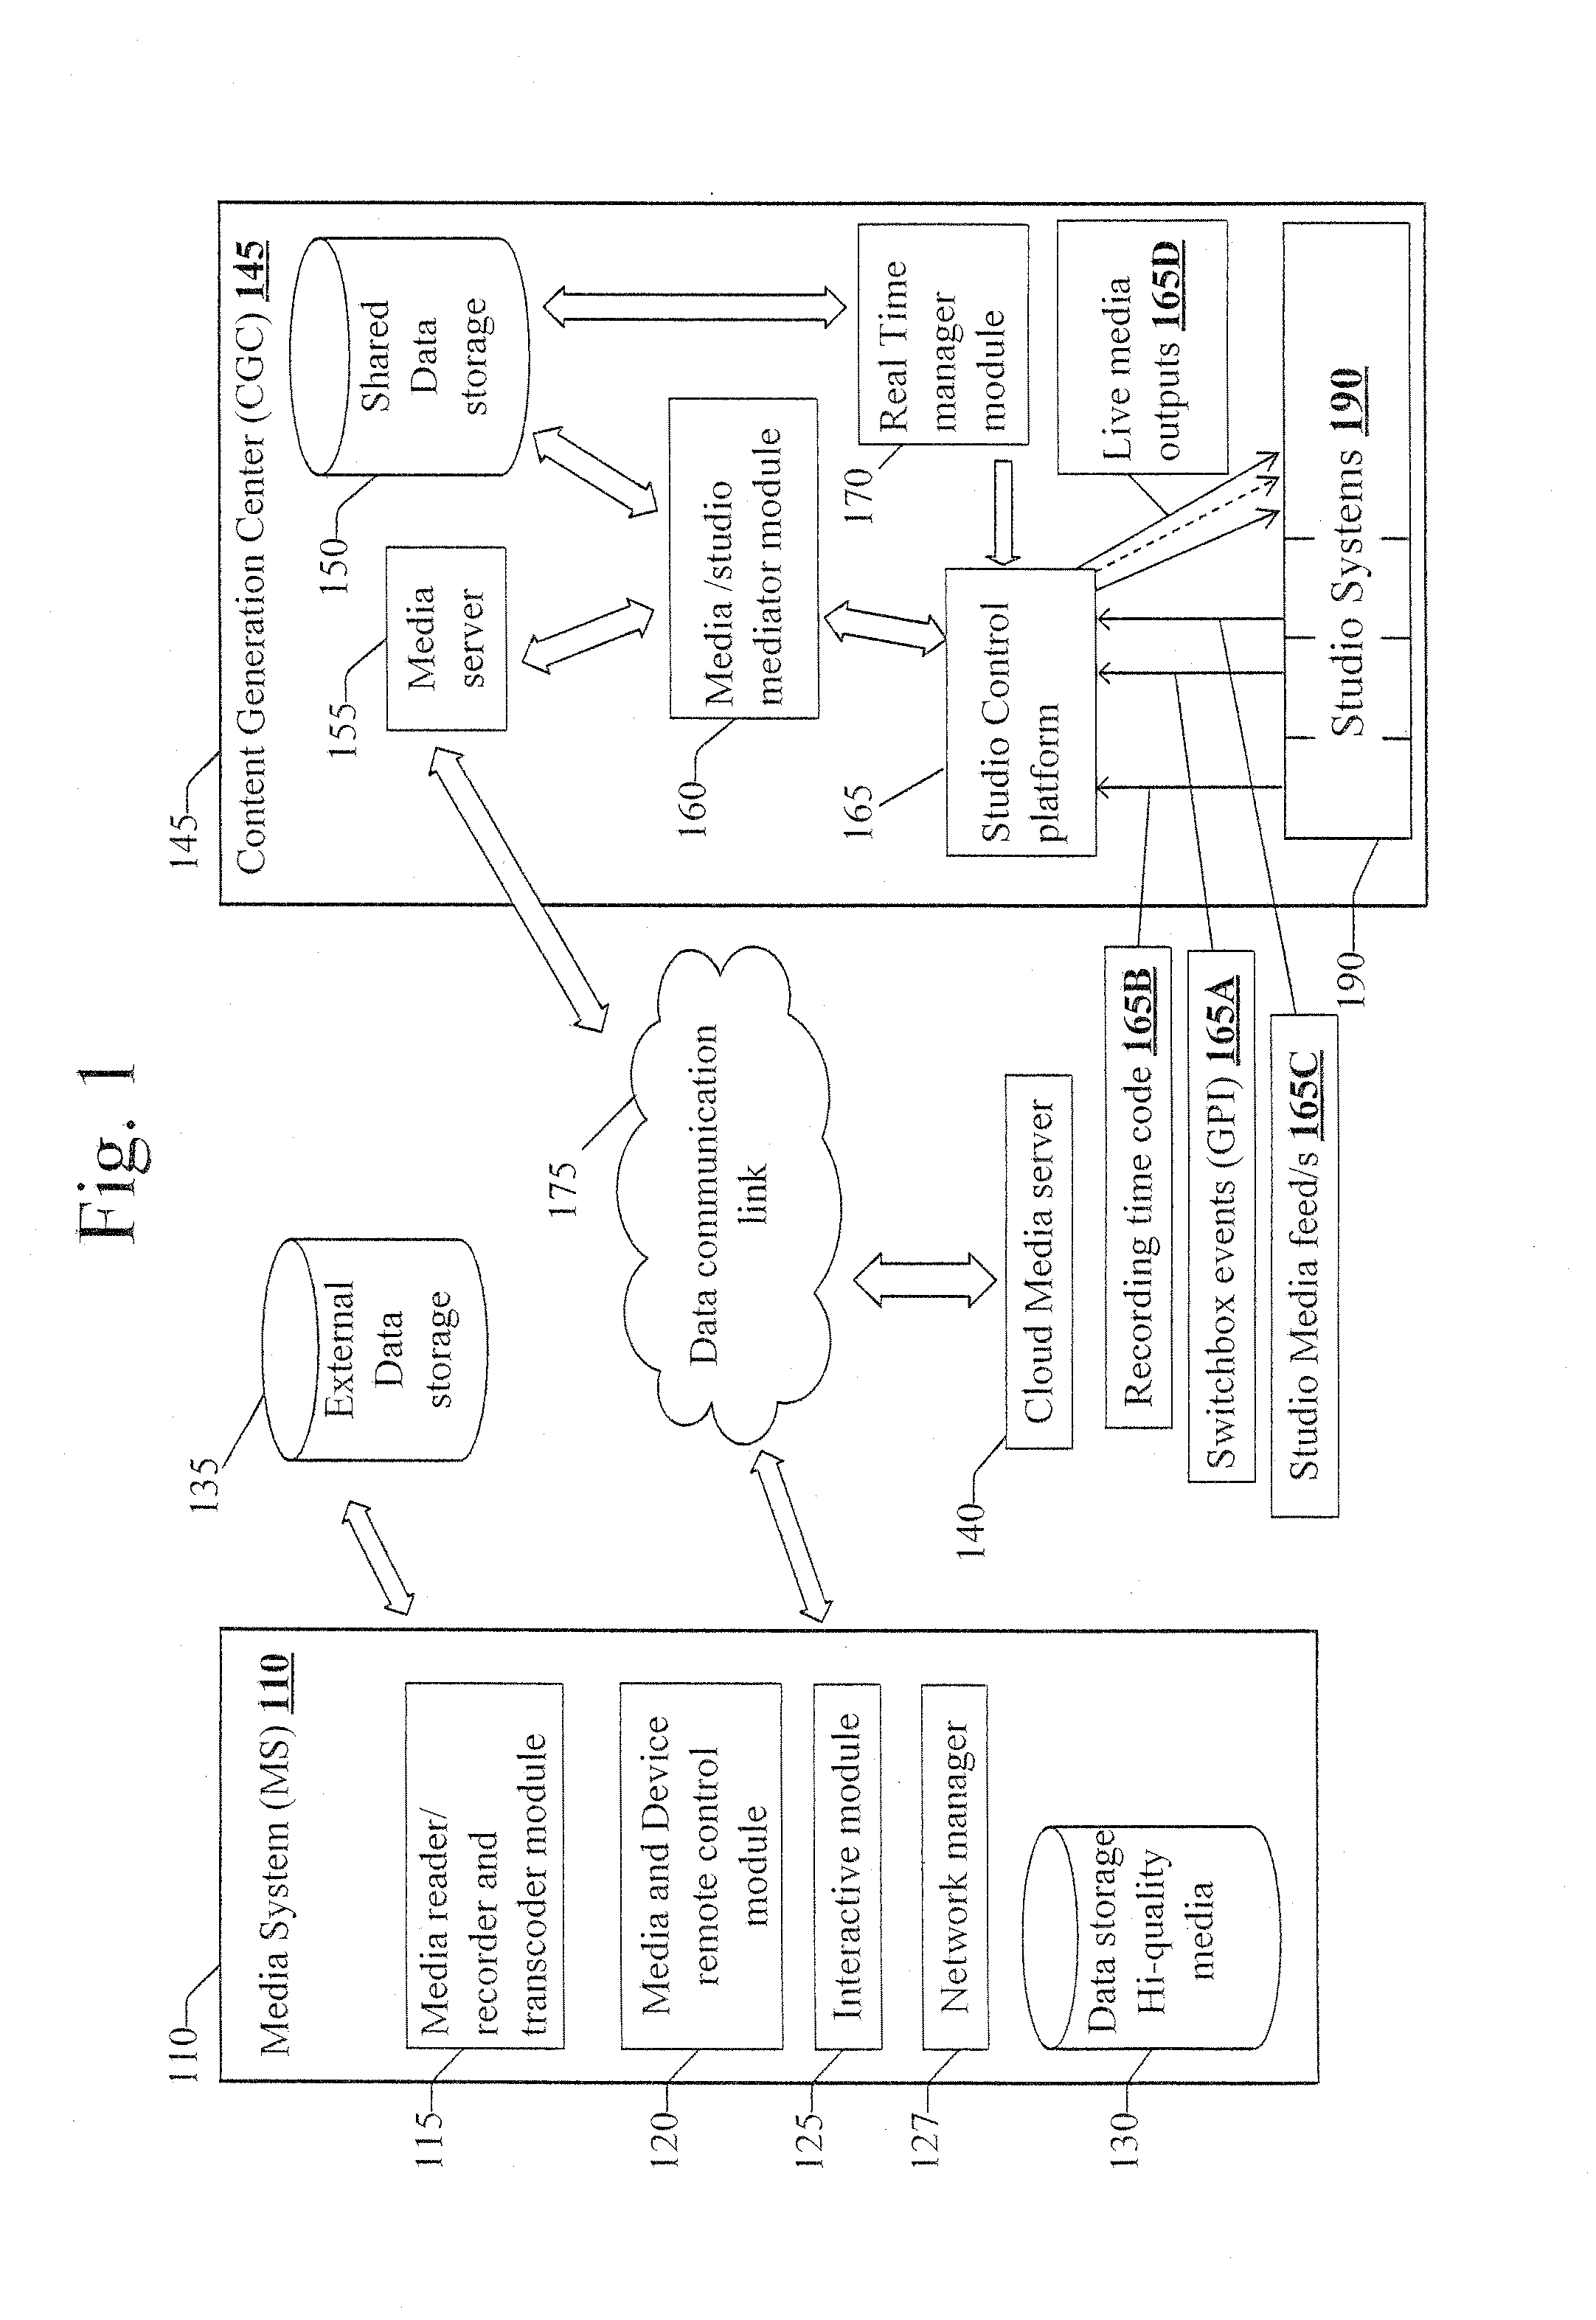 Method and system for central utilization of remotely generated large media data streams despite network bandwidth limitations